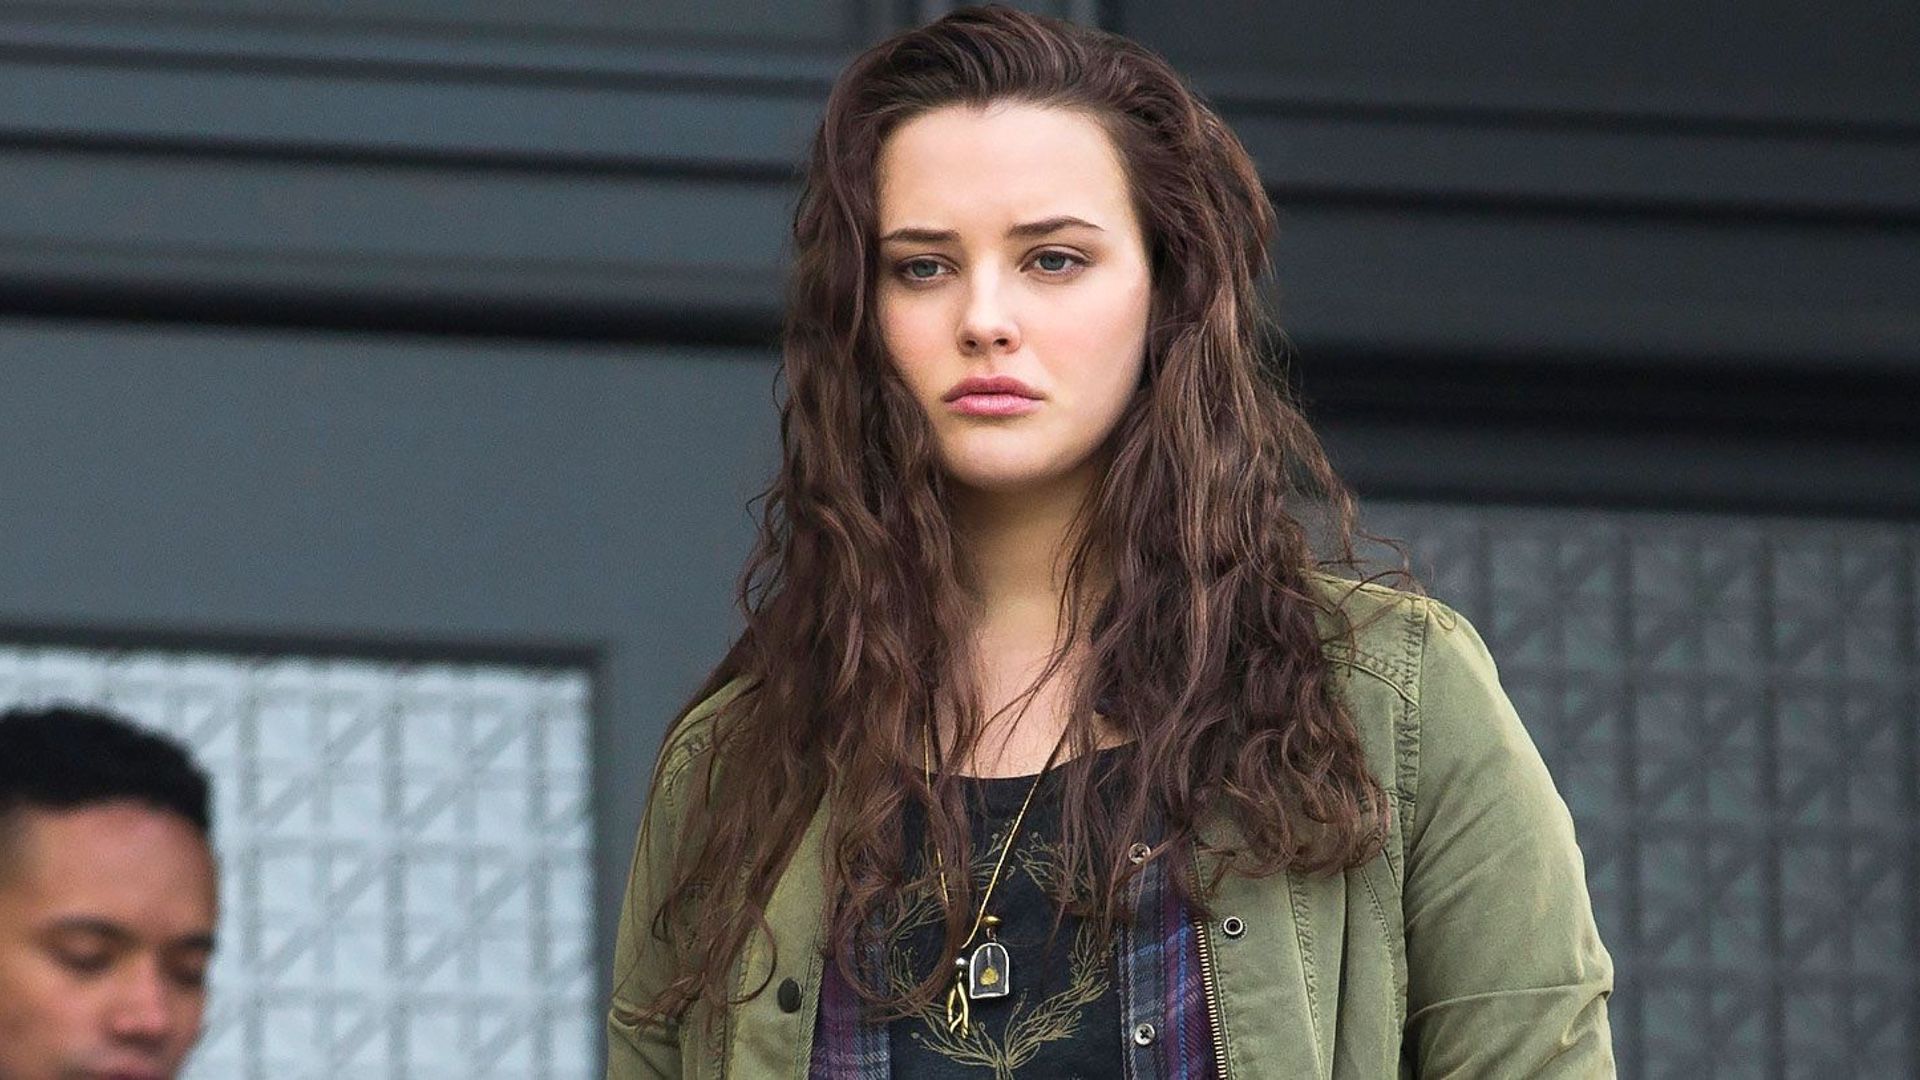 RUMOR: Avengers 4: Katherine Langford Could Be Playing As